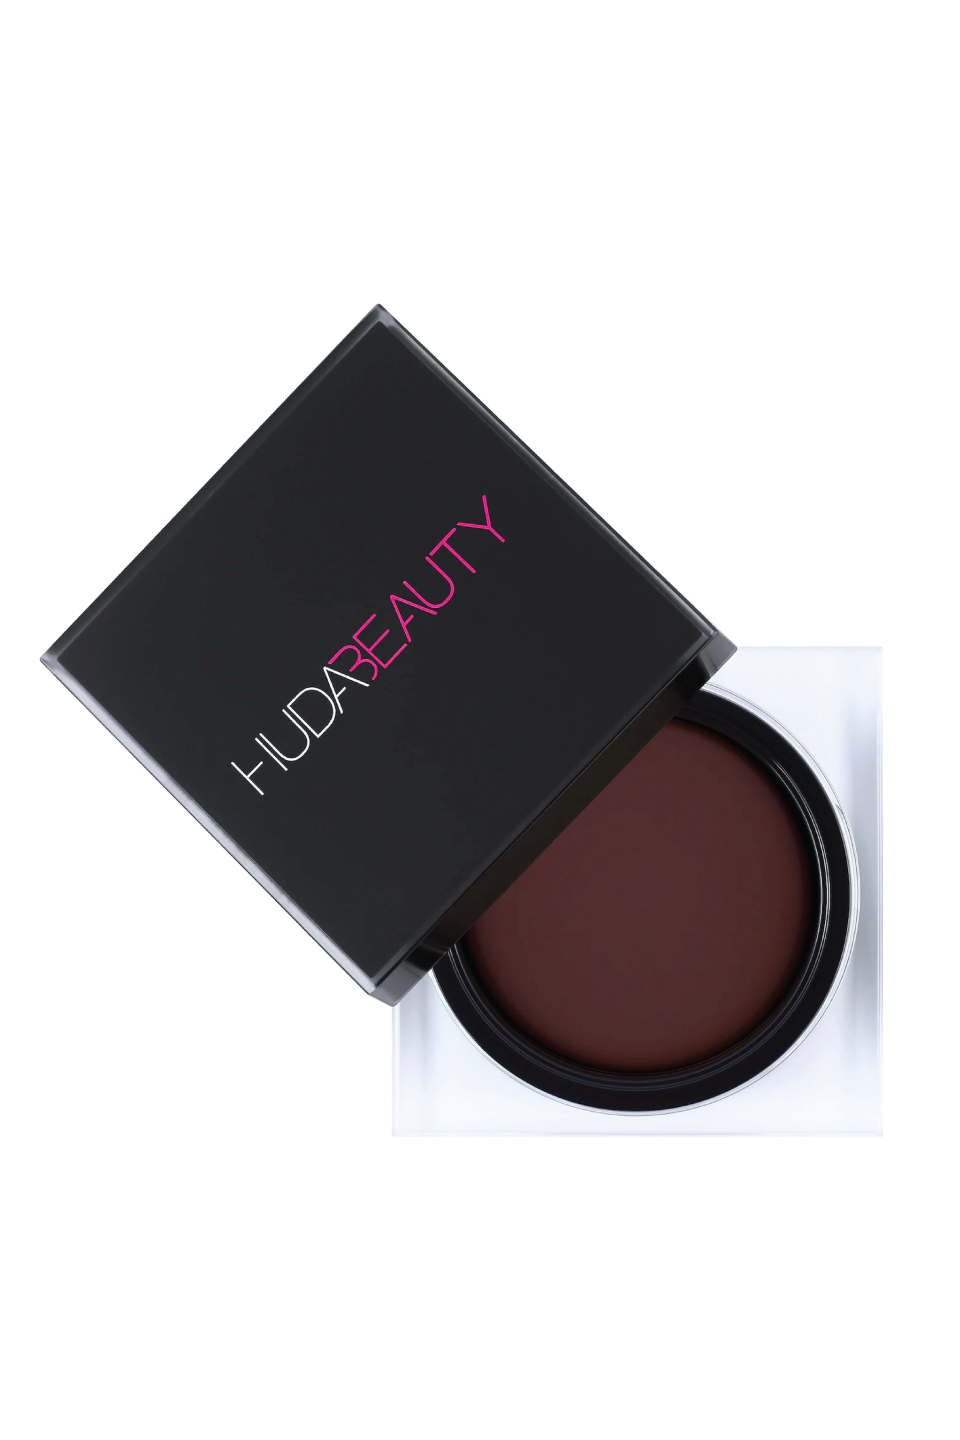 <p><strong>HUDA BEAUTY</strong></p><p>sephora.com</p><p><strong>$30.00</strong></p><p><a href="https://go.redirectingat.com?id=74968X1596630&url=https%3A%2F%2Fwww.sephora.com%2Fproduct%2Ftantour-P444605&sref=https%3A%2F%2Fwww.cosmopolitan.com%2Fstyle-beauty%2Fbeauty%2Fg38749323%2Fbest-cream-bronzers%2F" rel="nofollow noopener" target="_blank" data-ylk="slk:Shop Now" class="link ">Shop Now</a></p><p>With a very inclusive shade range, this cream bronzer works great for people with fair skin and for those with deep skin. The best part about this bronzer is the fact that all the shades have a cool undertone. This means that it <strong>essentially doubles as a contour,</strong> and will give your cheeks that sculpted yet warm glow. If you need a refresh on <a href="https://www.cosmopolitan.com/style-beauty/beauty/how-to/a43730/face-shape-contour-map/" rel="nofollow noopener" target="_blank" data-ylk="slk:how to contour" class="link ">how to contour</a>, we've got a guide.</p>